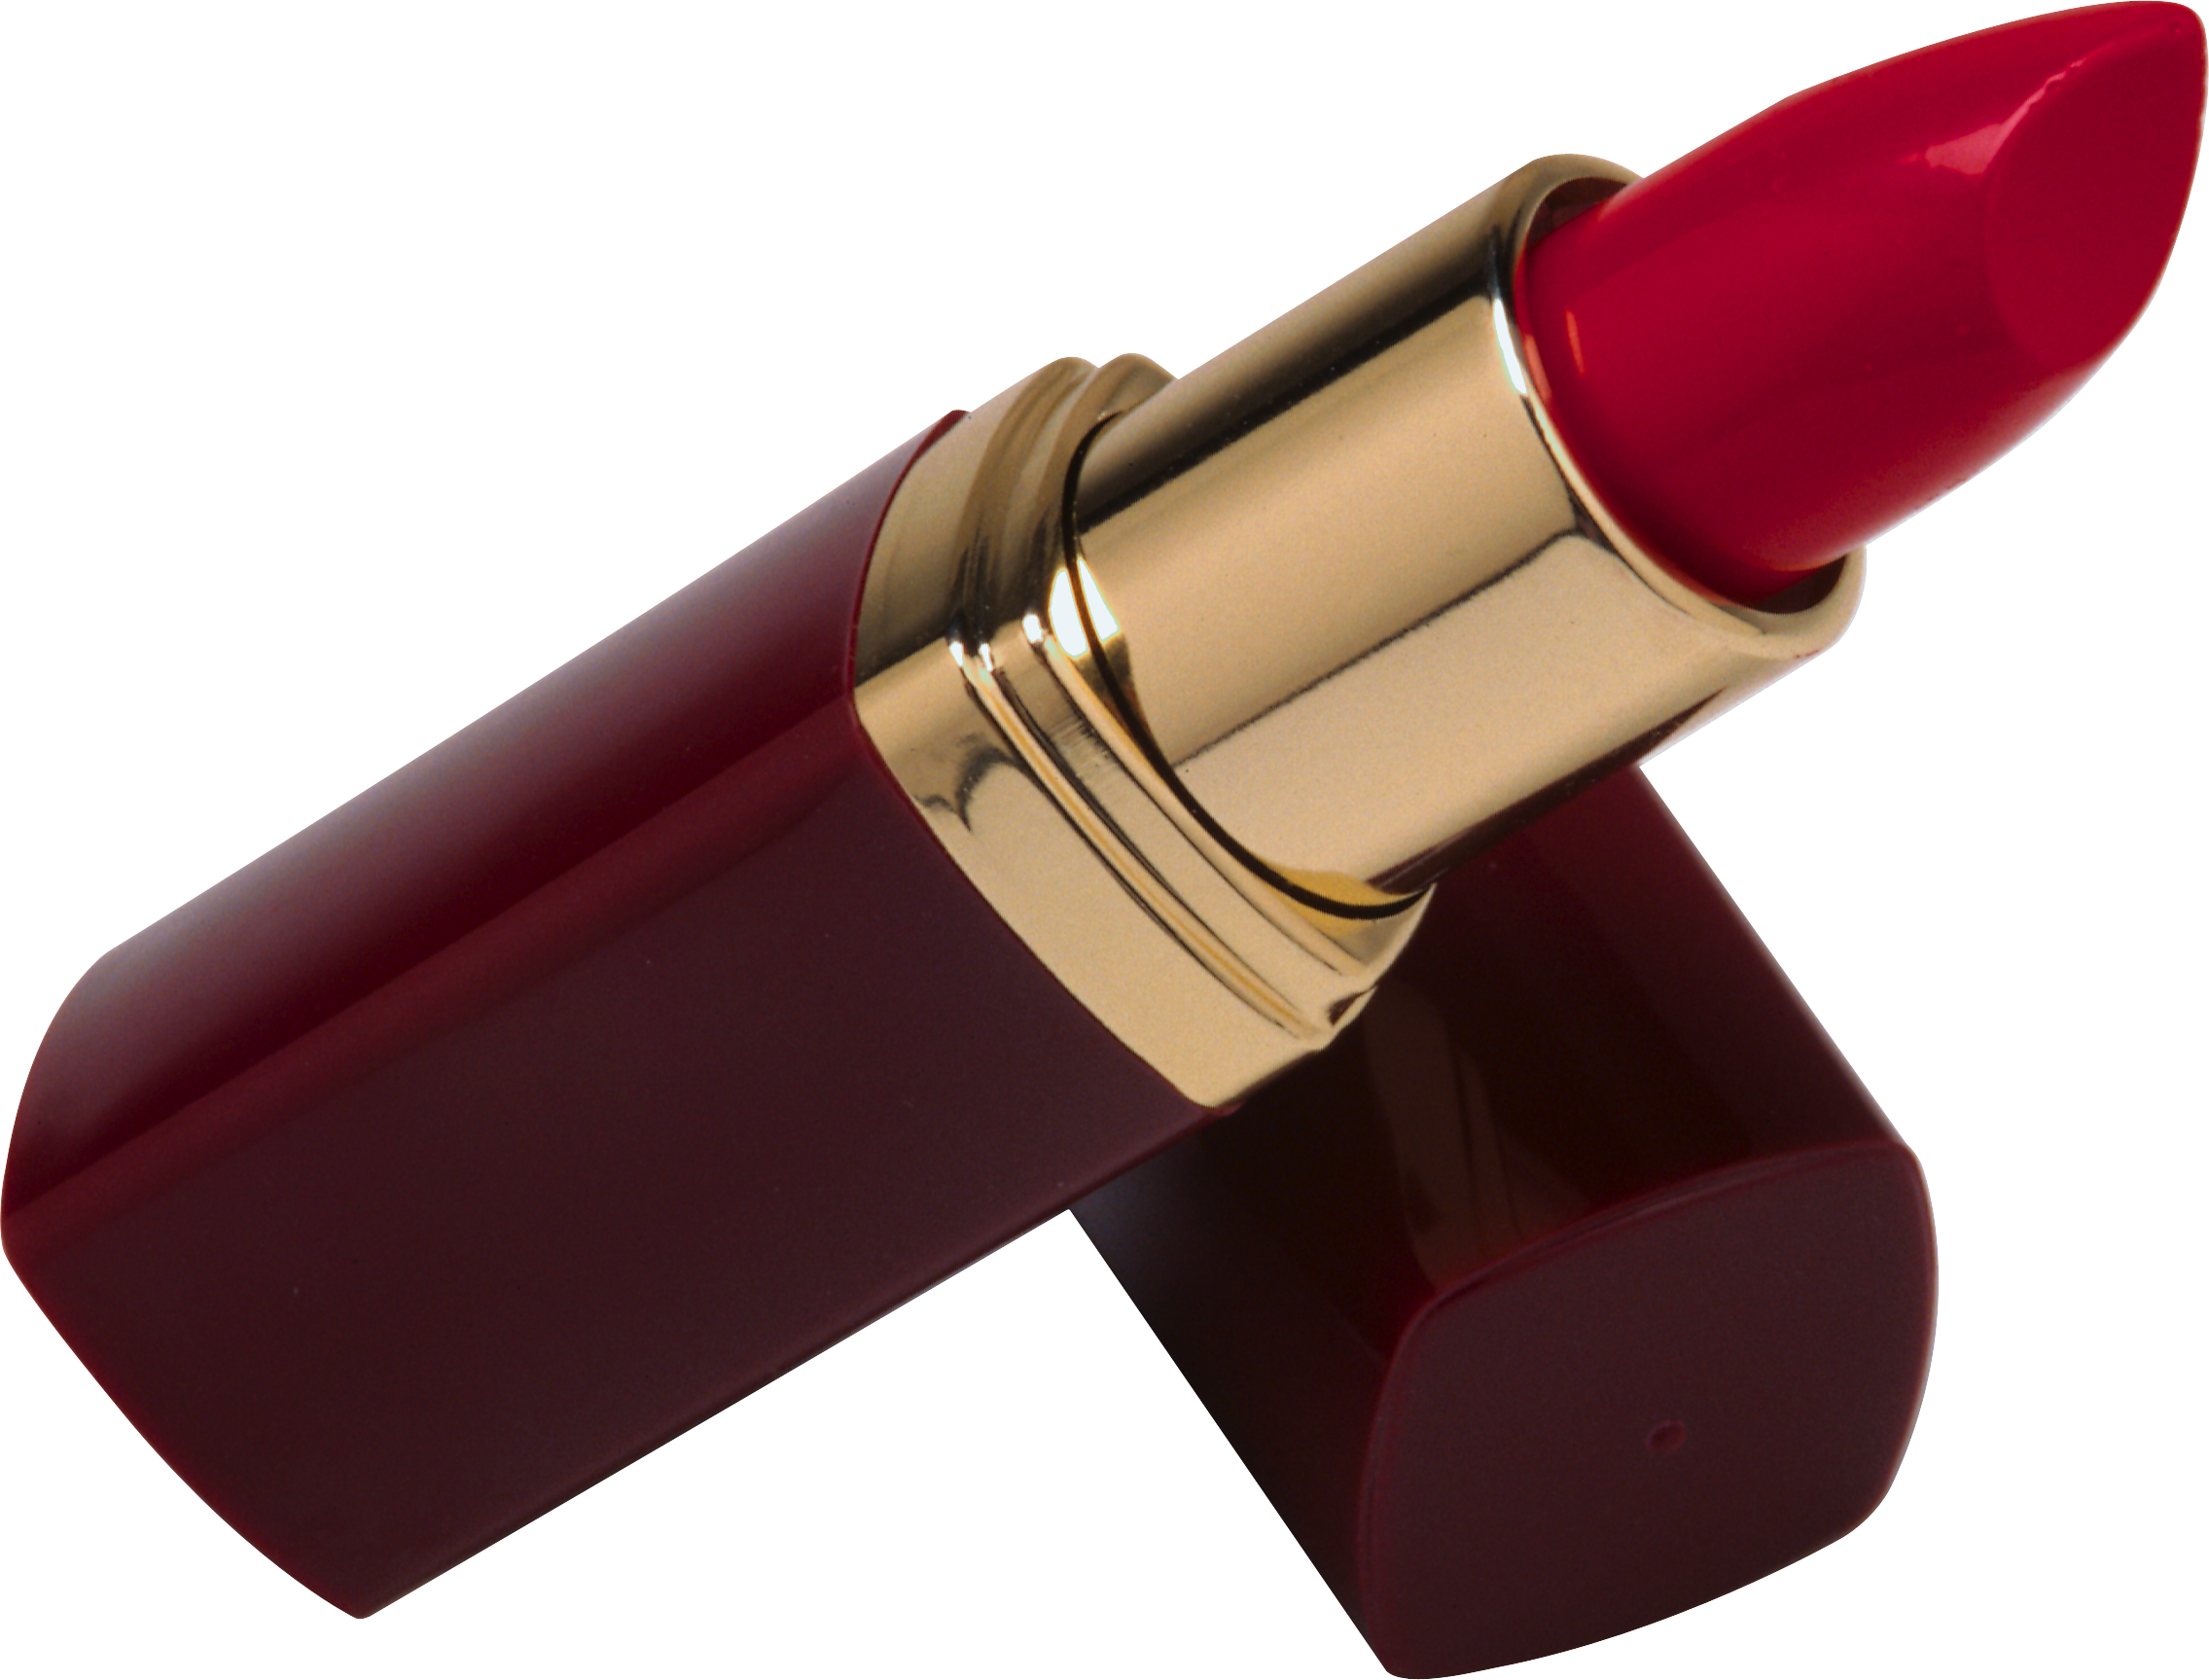 Lipstick PNG Free File Download